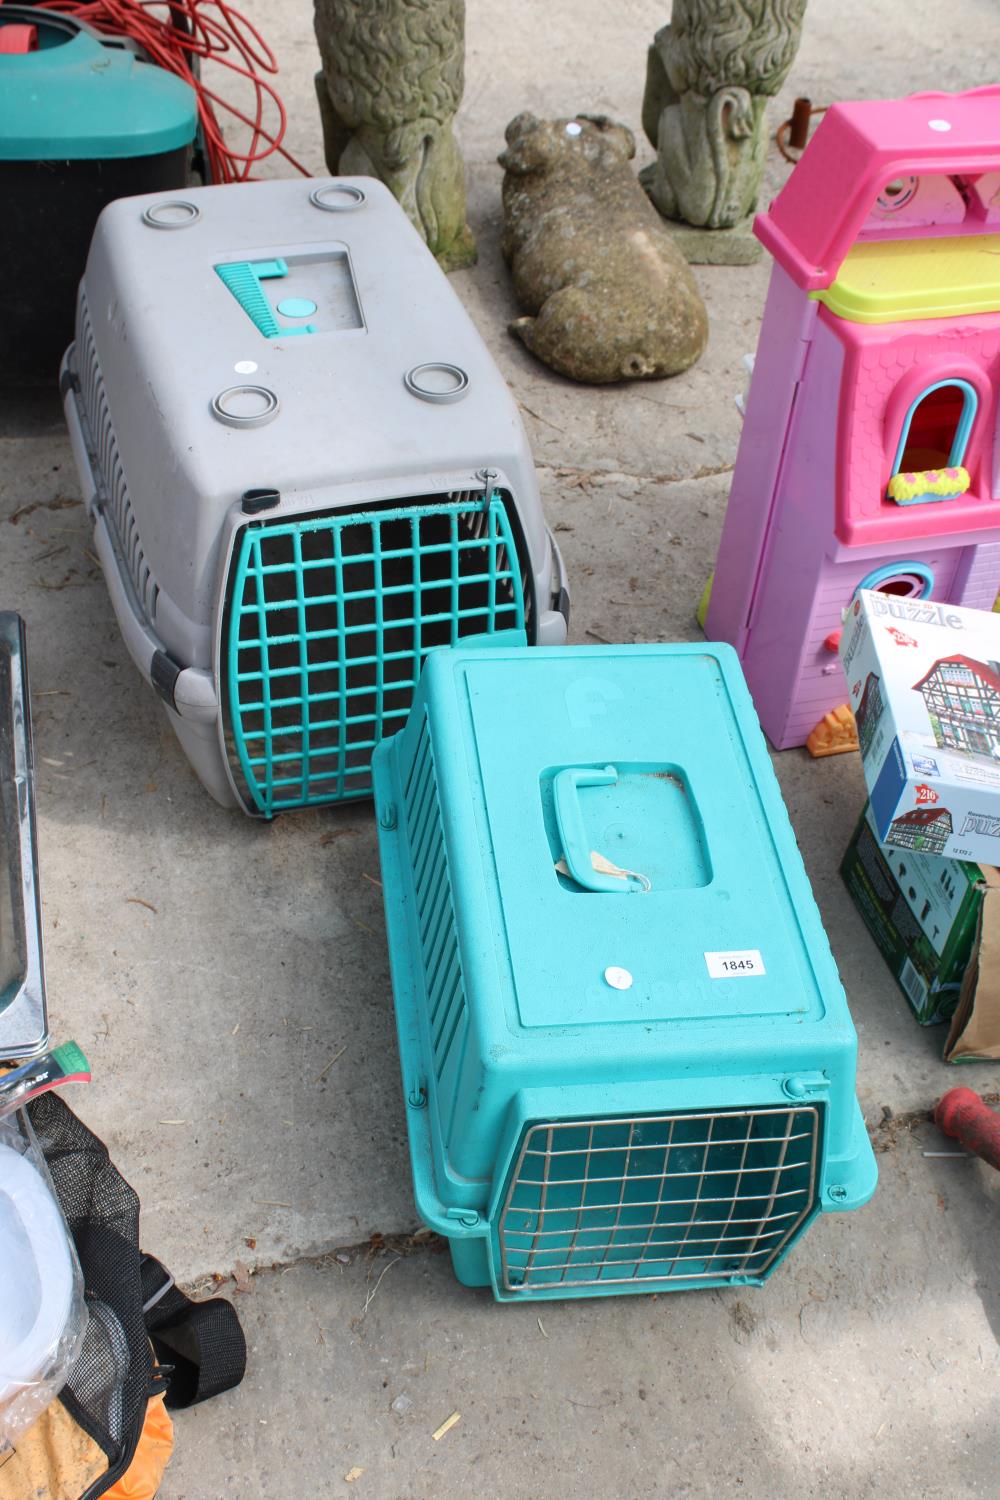 TWO PLASTIC PET CARRYING CRATES